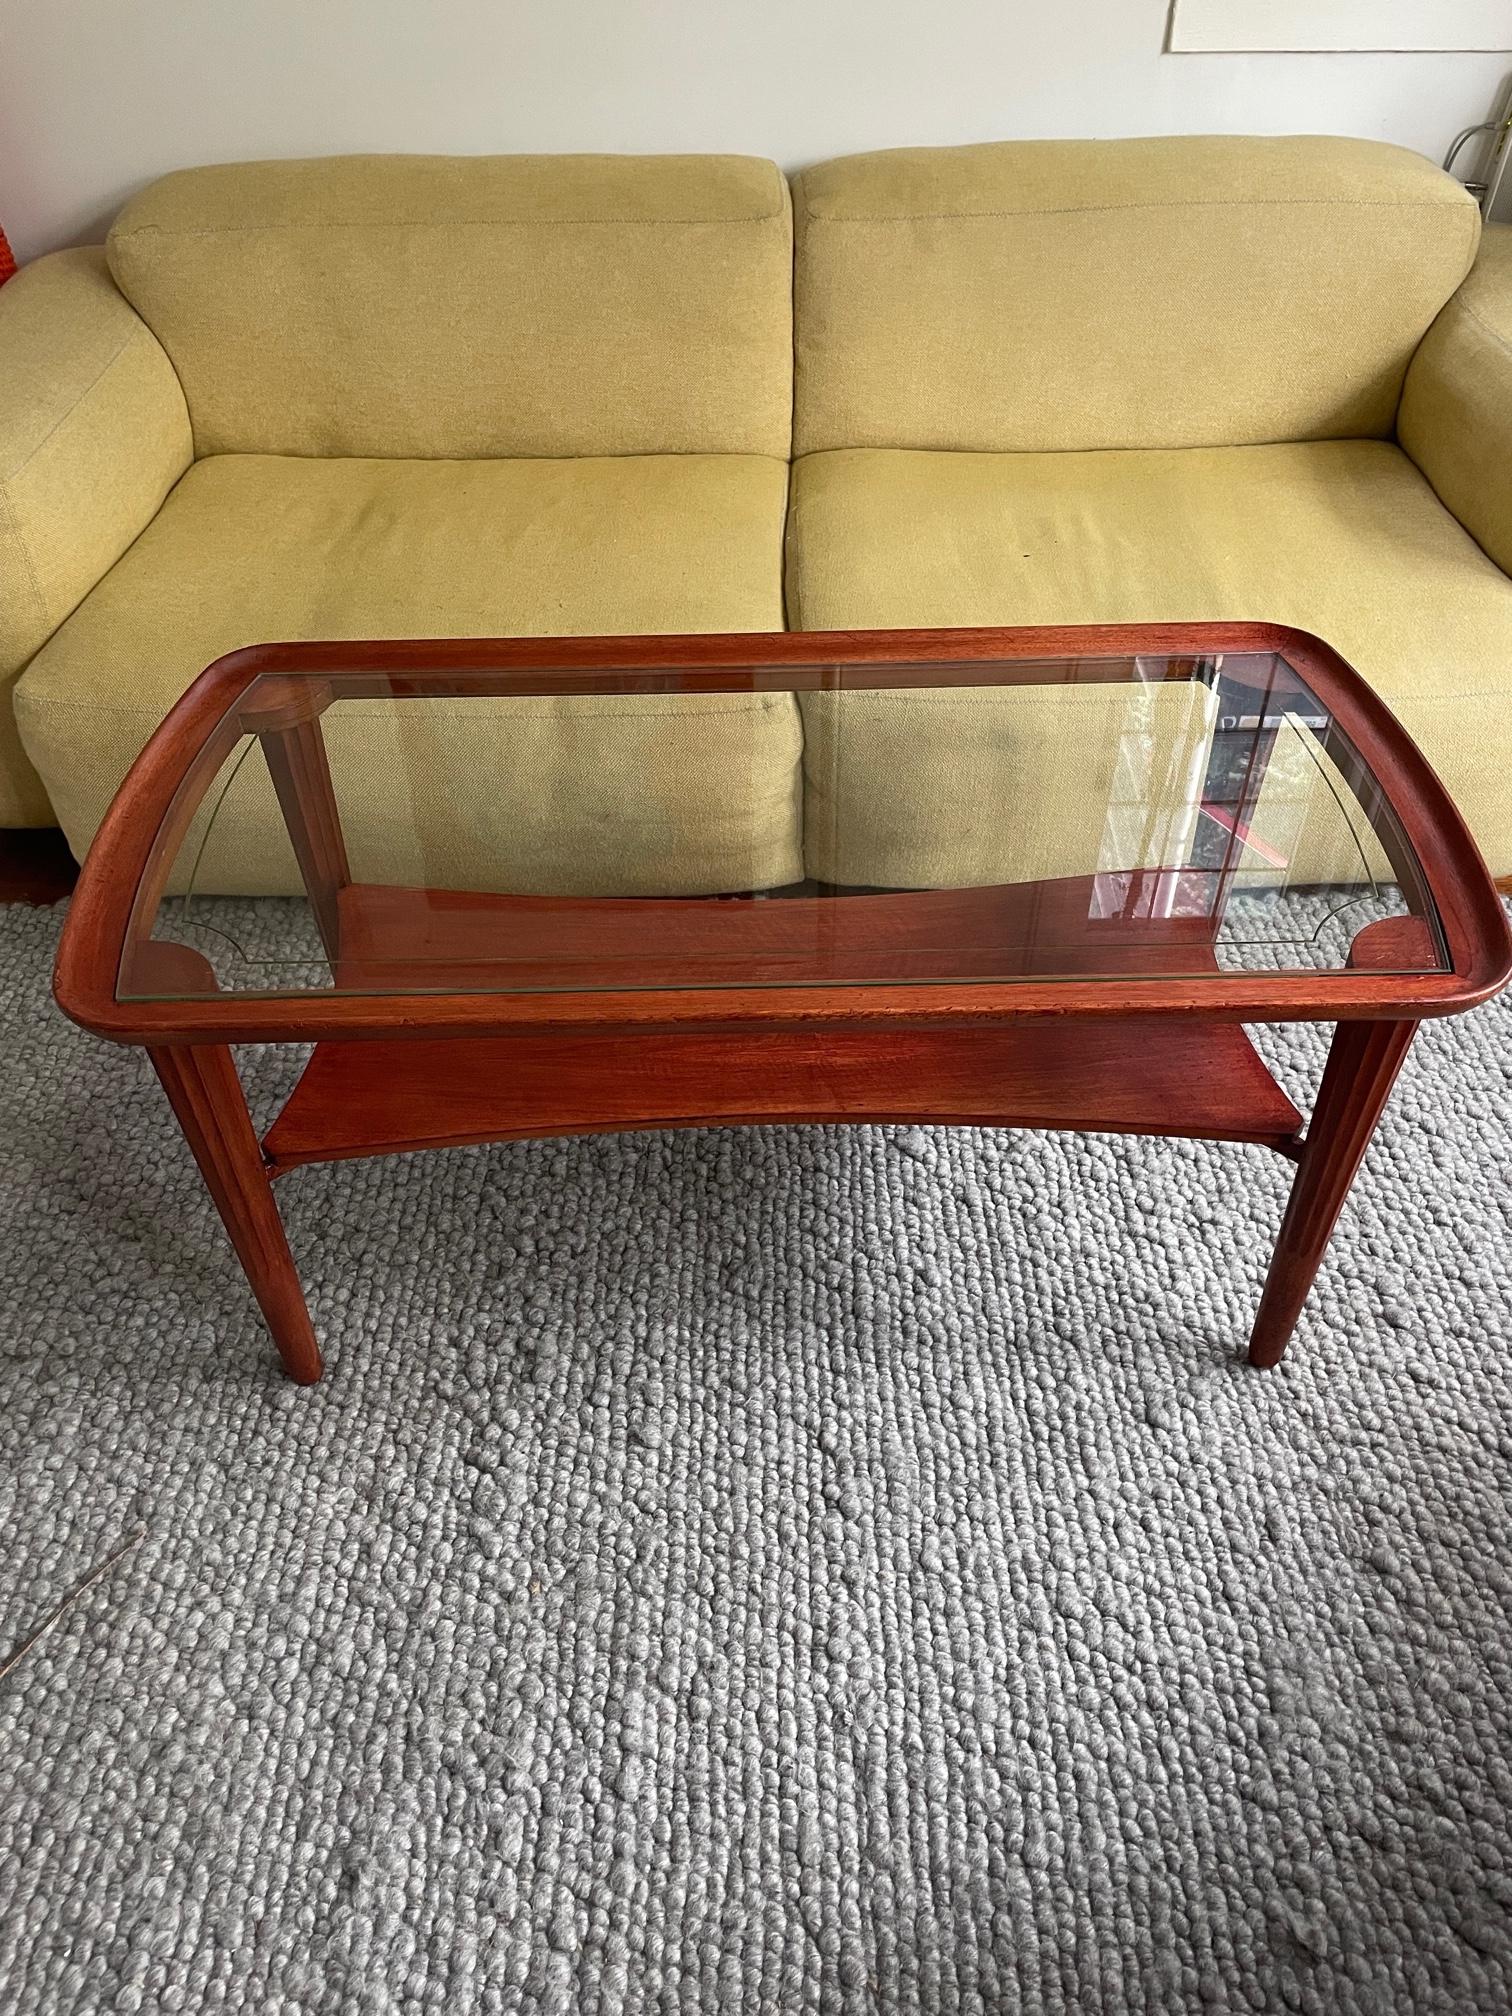 What a table! This iconic art-deco (style) table is a lust for the eye. A table you just want in your home, store, shop or office. 
In plain beautiful style and condition. Minor signs of usage, small scratches in the glass. Just beautiful patina.